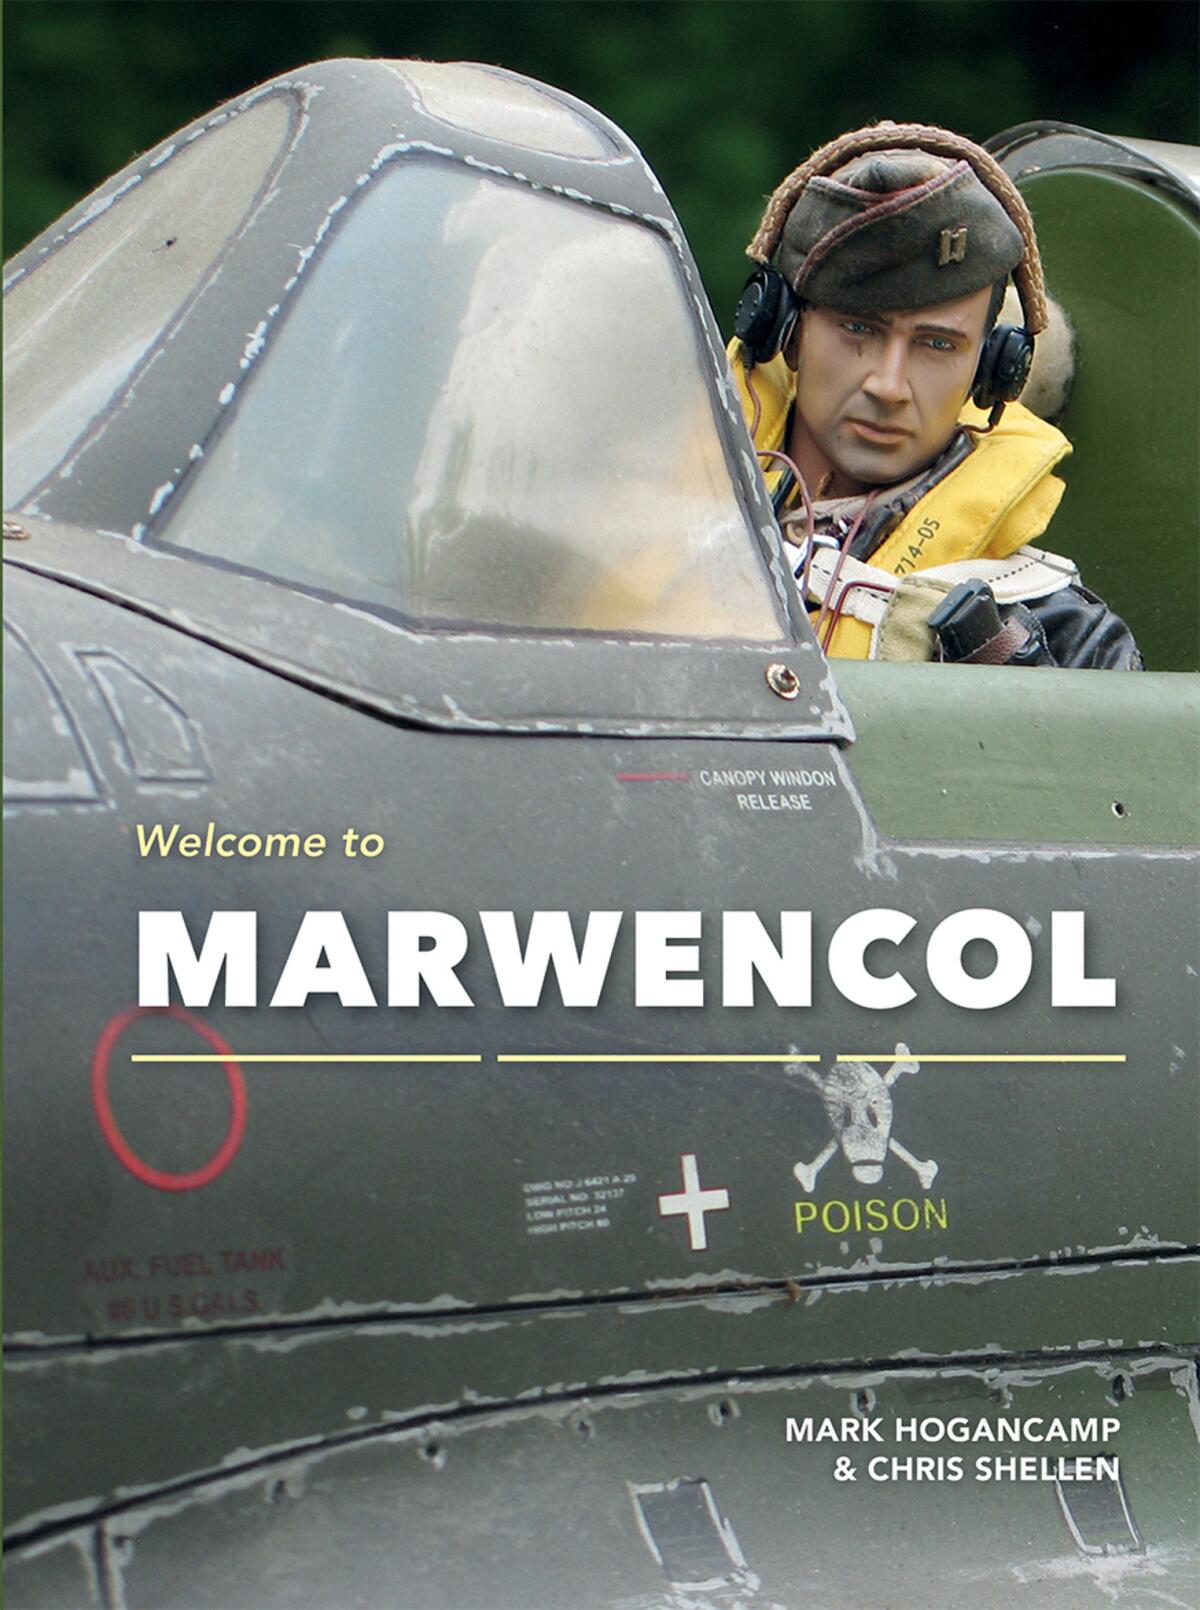 "Welcome to Marwencol" by Mark Hogancamp and Chris Shellen